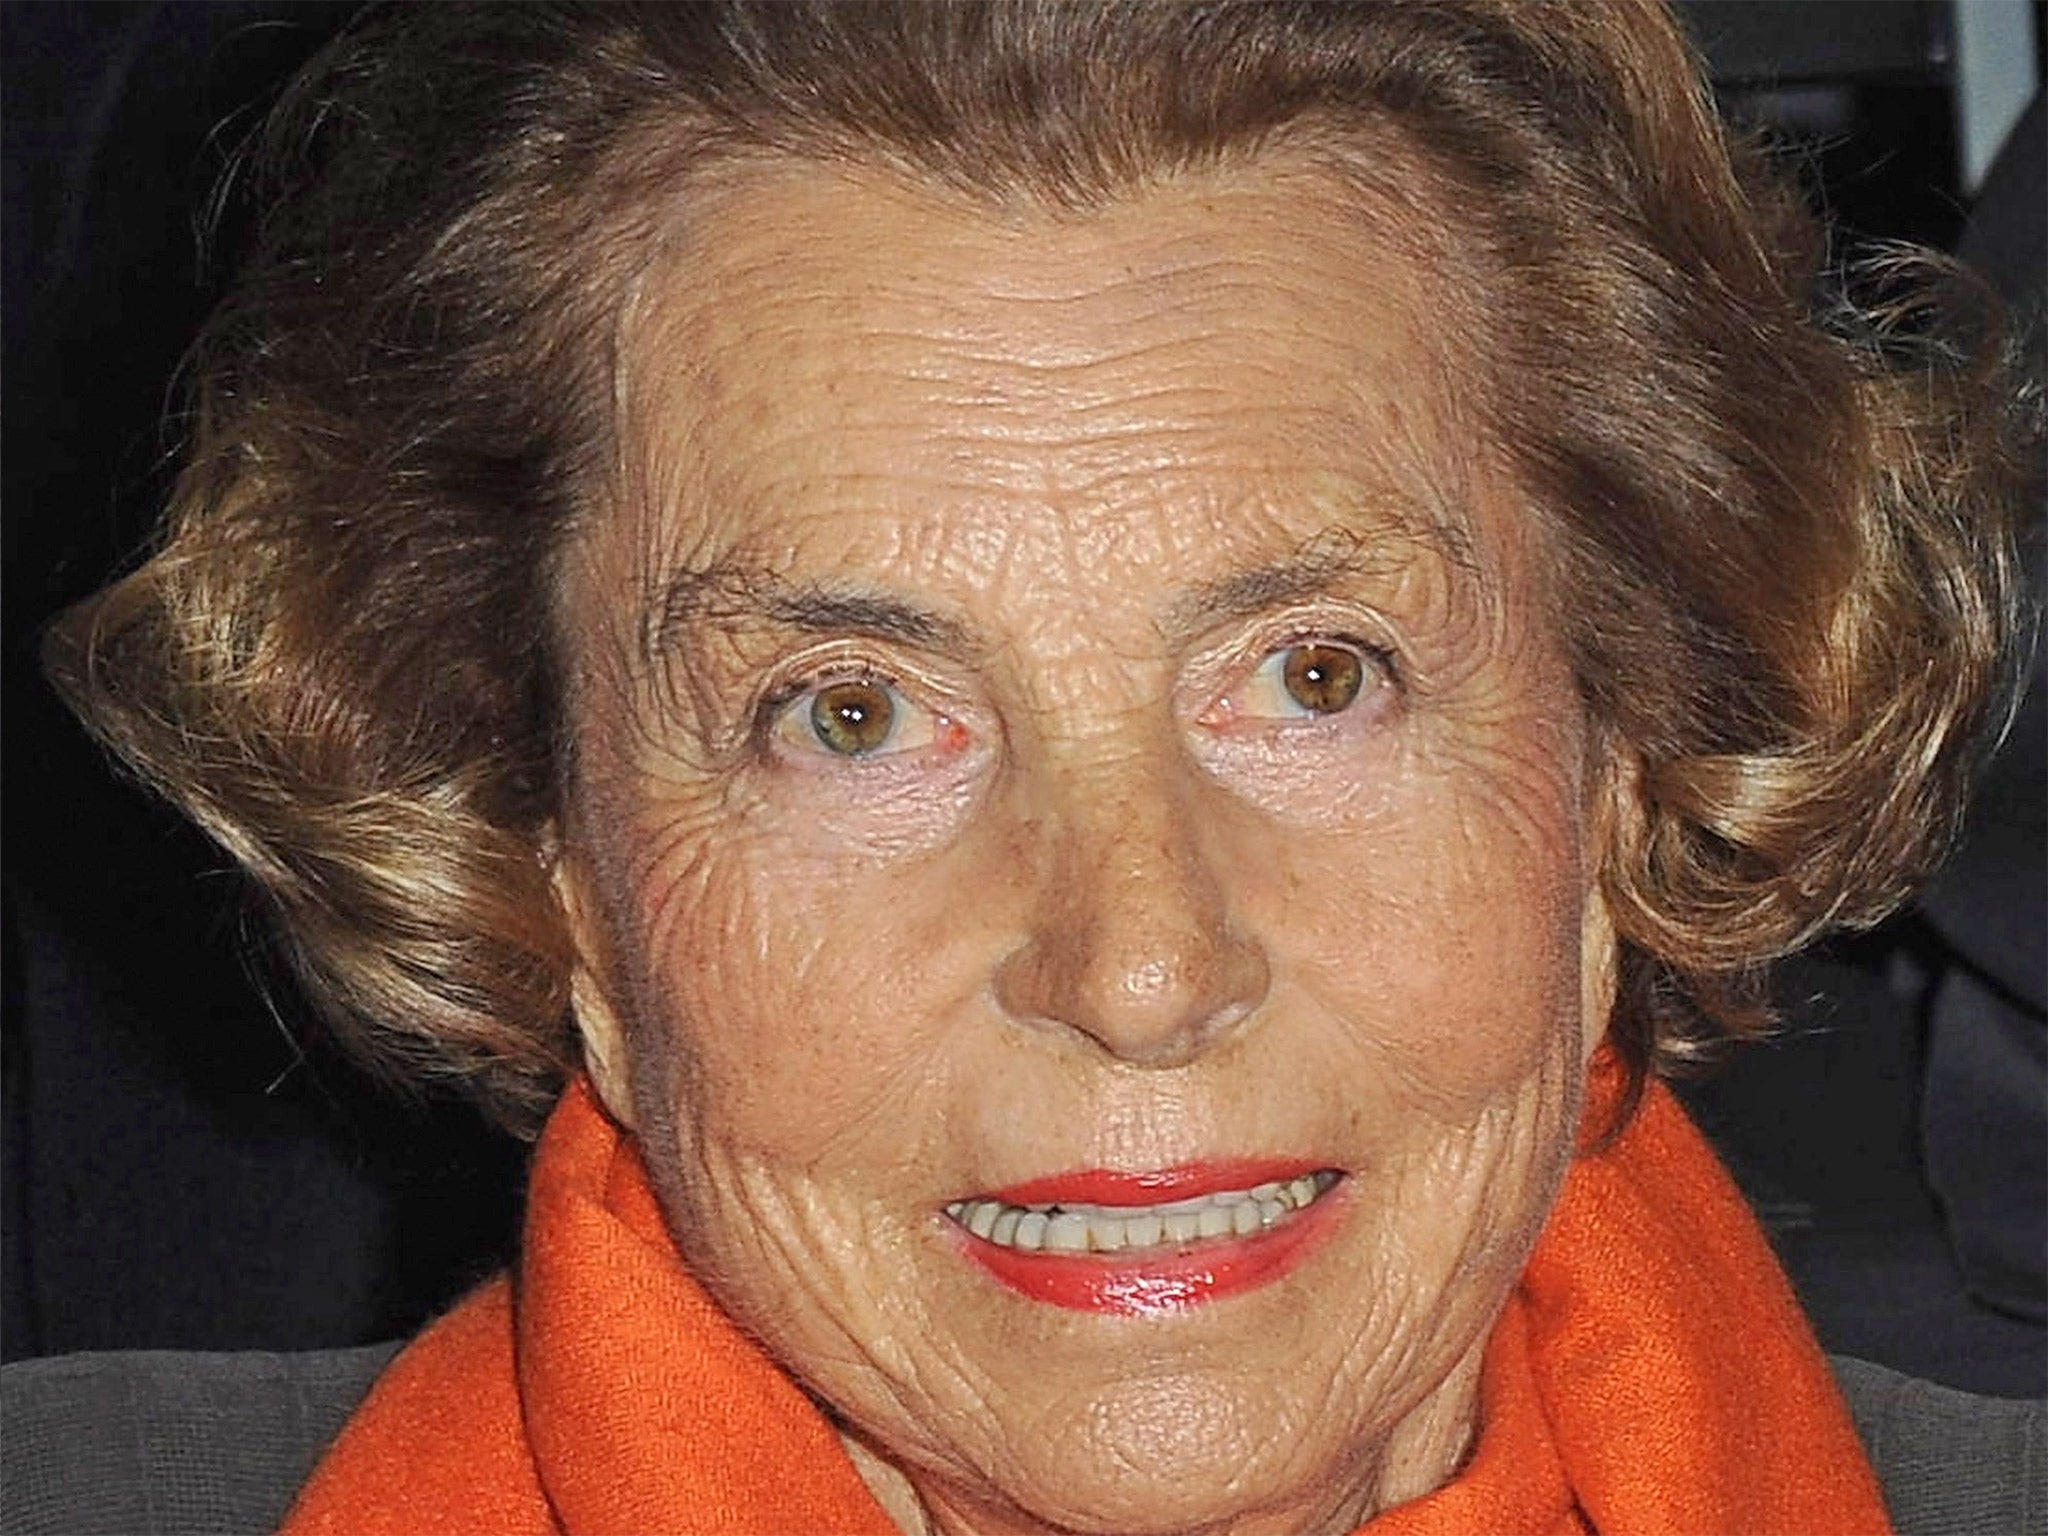 &#13;
Liliane Bettencourt has given hundreds of millions of euros to friends and advisers (Getty)&#13;